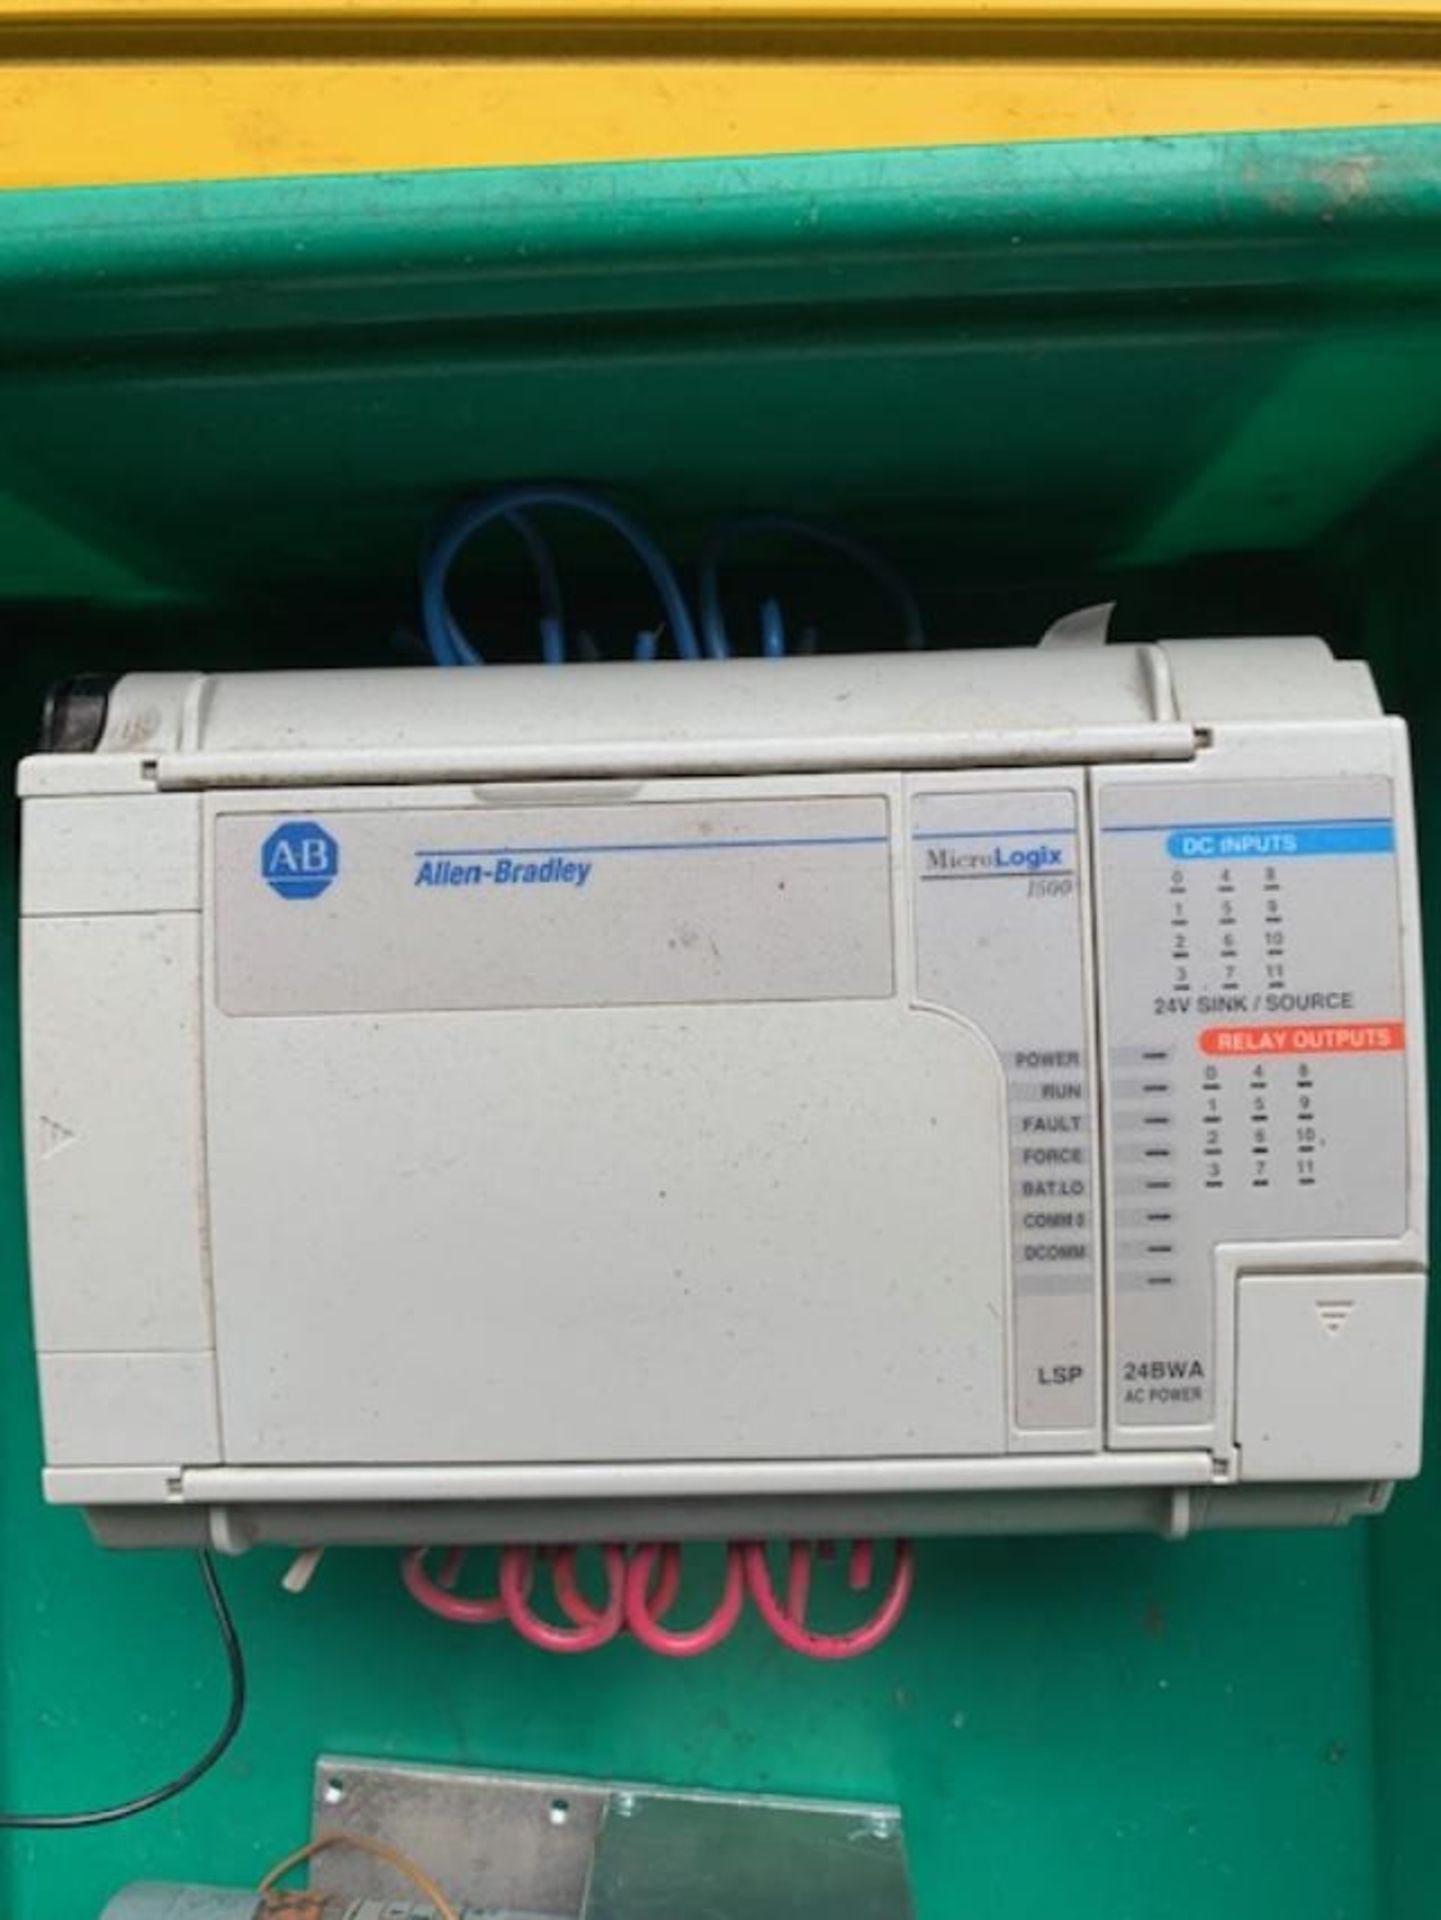 ALLEN BRADLEY MICRO LOGIC 1500, CAT #1764-24BWA, KNF 12V DC AIR PUMPS, RIGGING FEE $ - Image 2 of 3